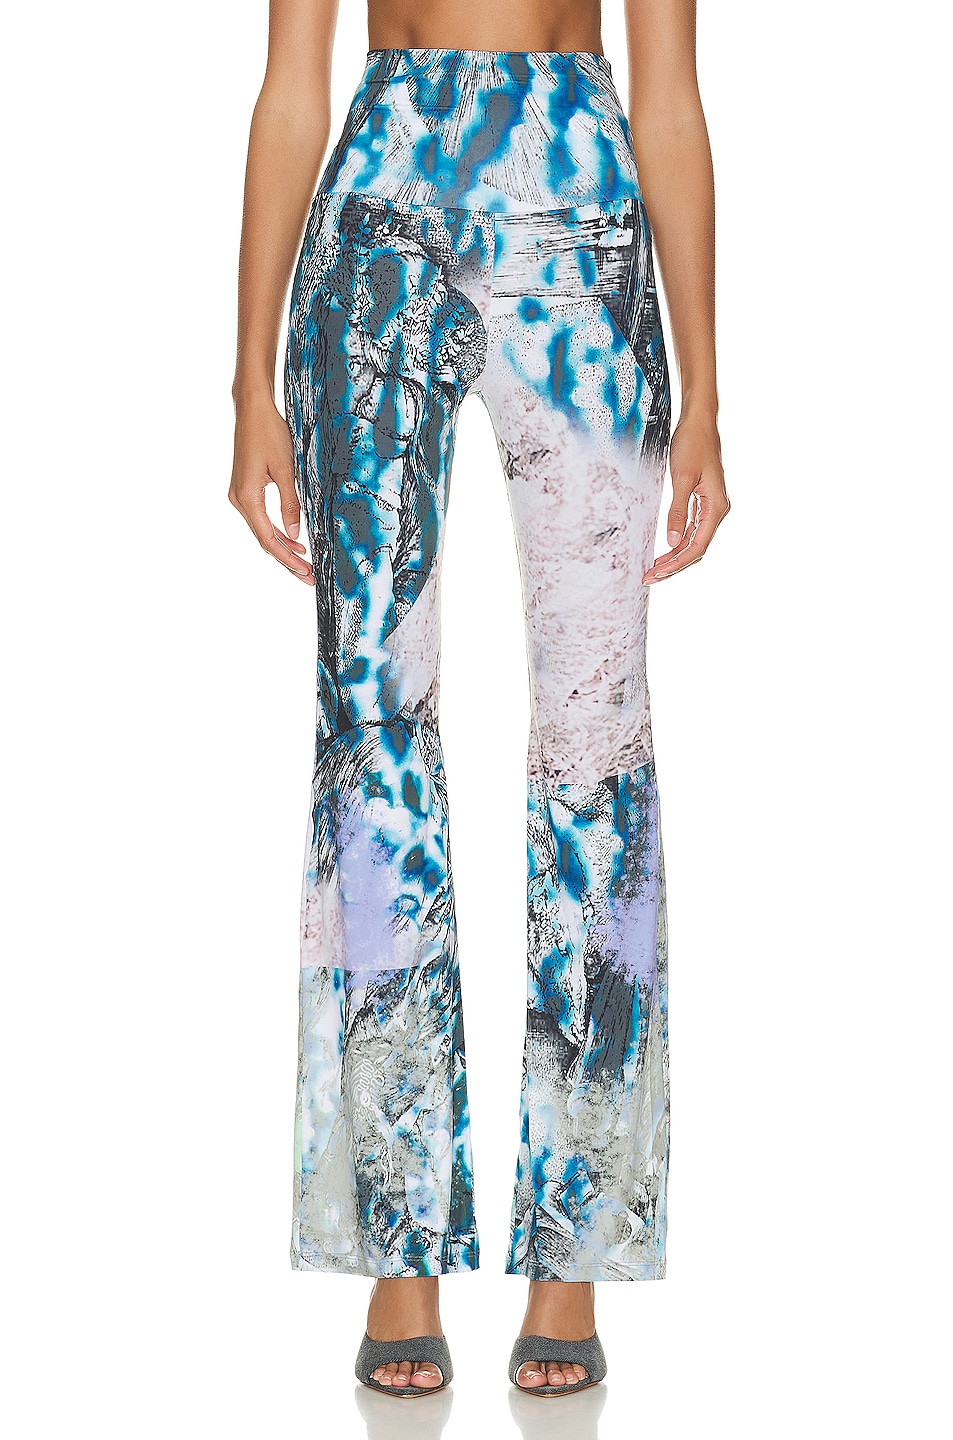 Image 1 of Maisie Wilen Nowhere Pant in Litho